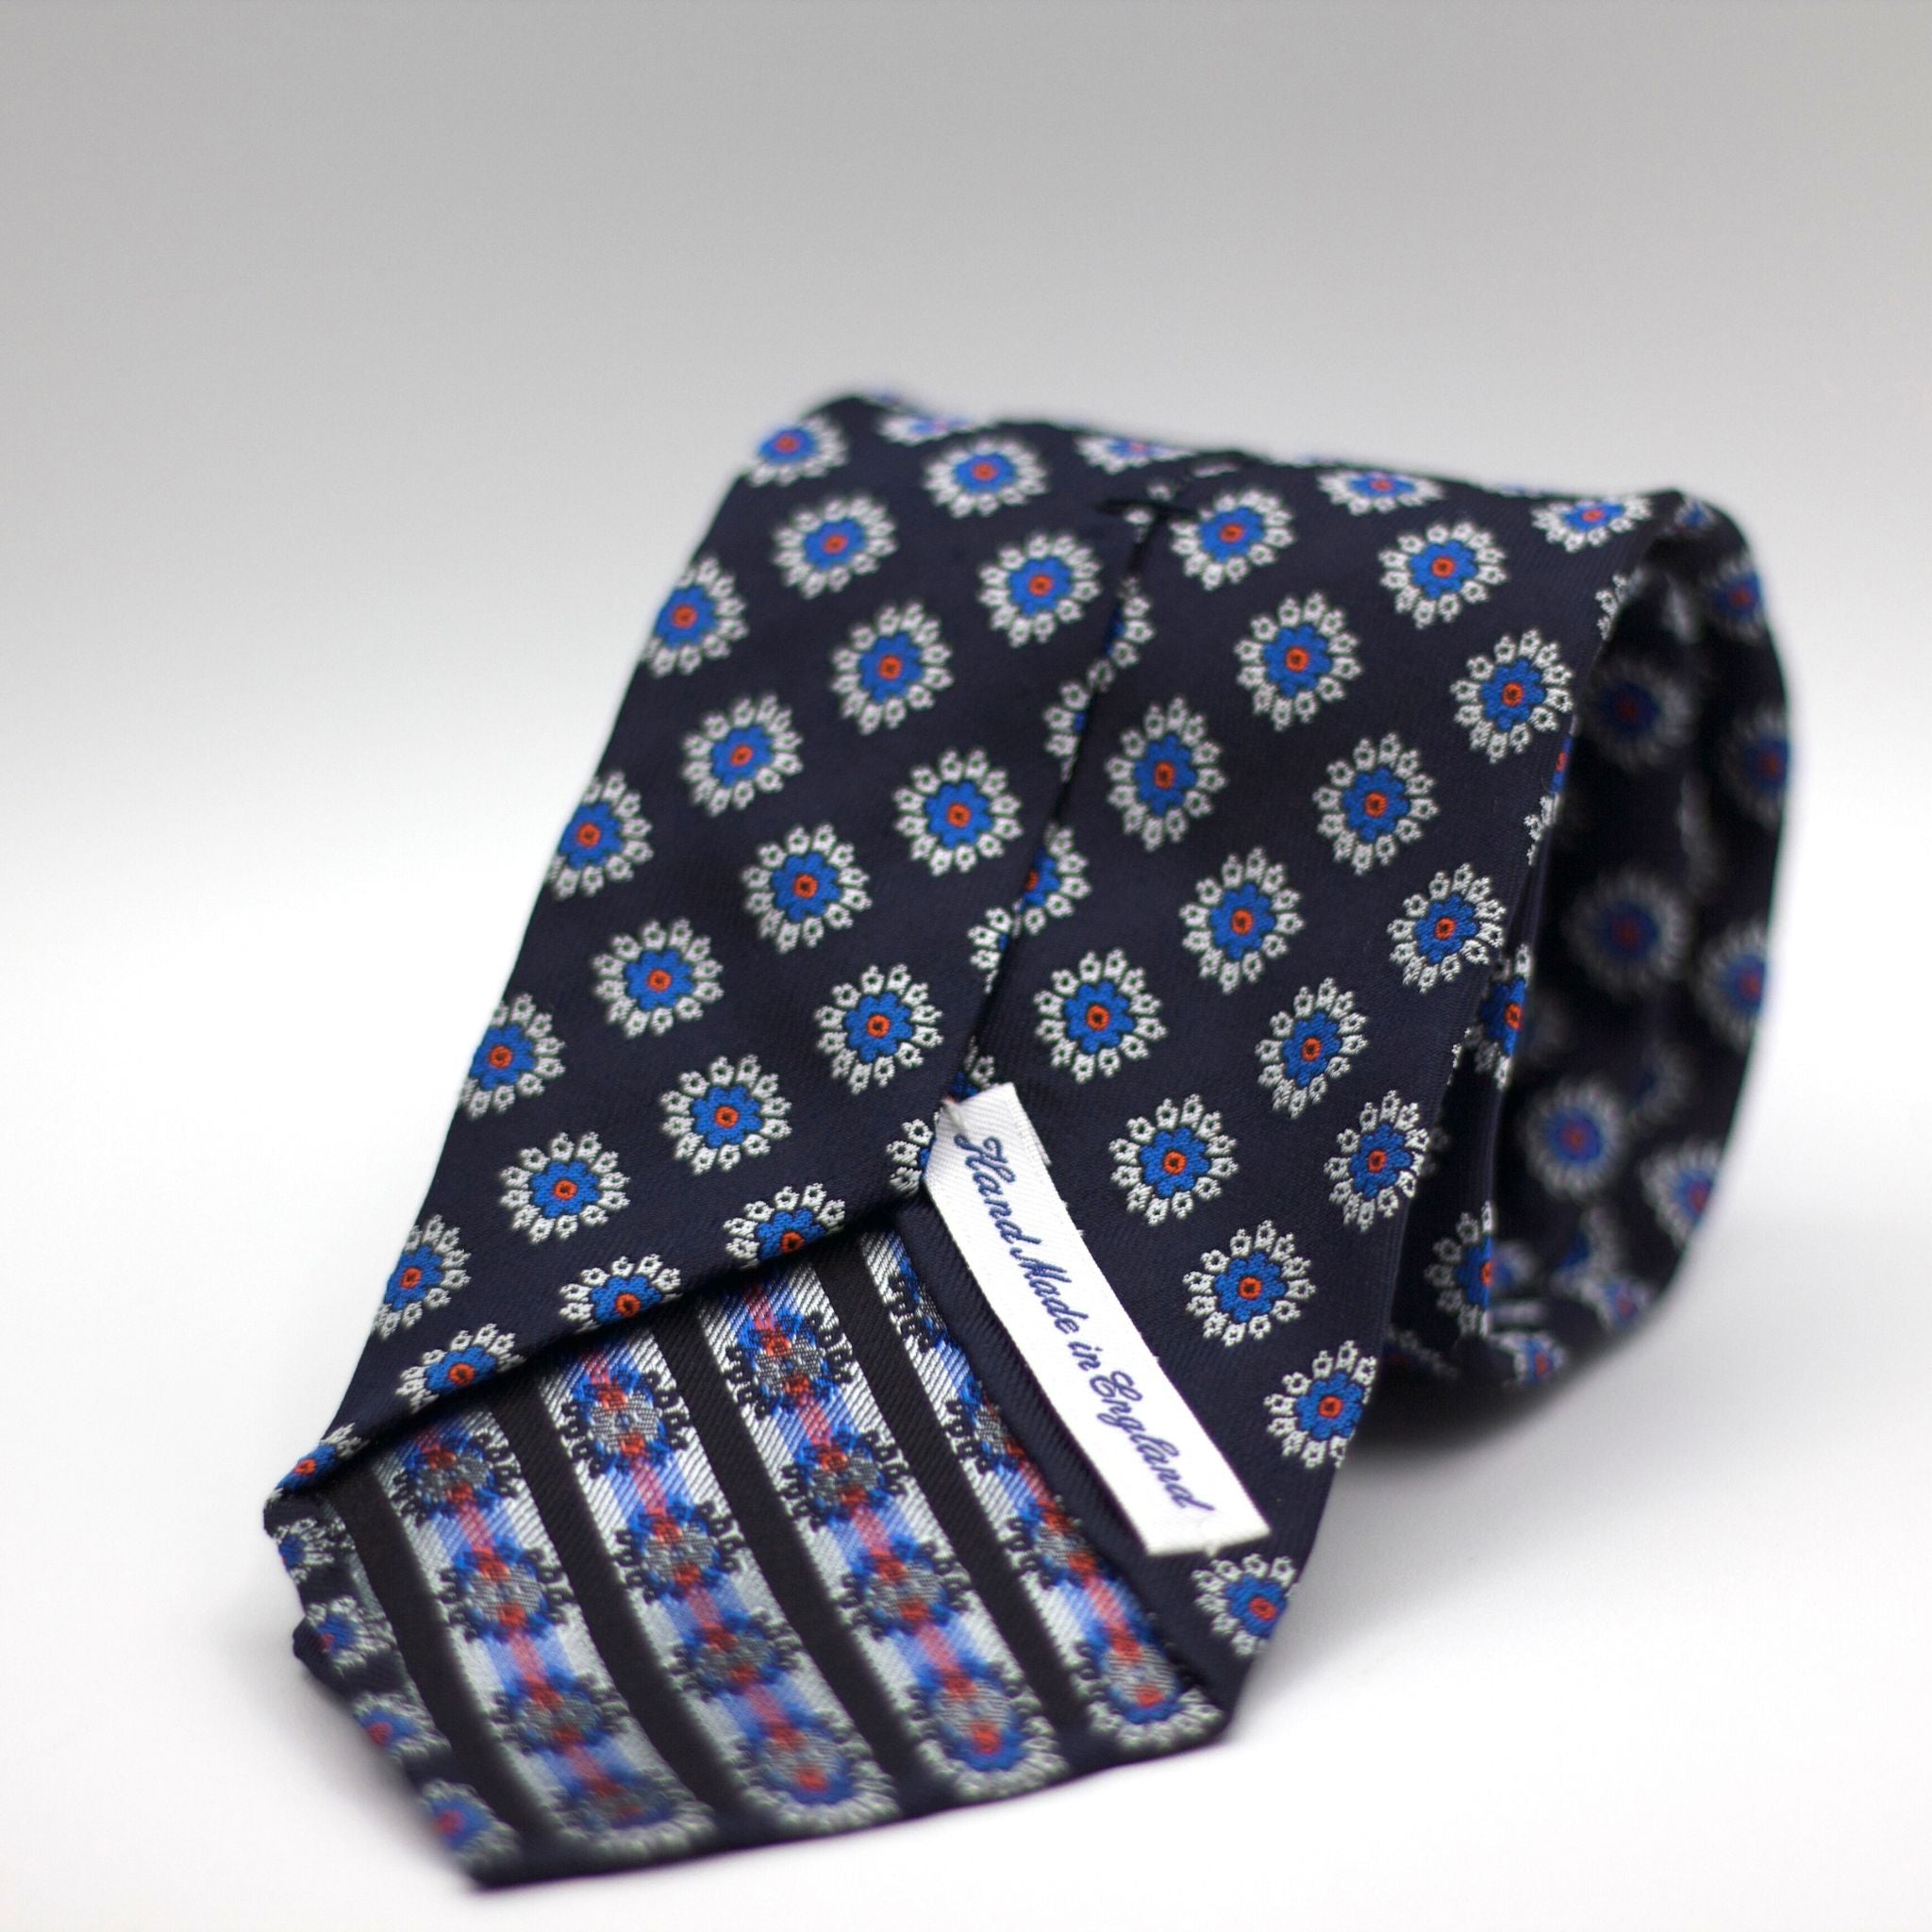 Cruciani & Bella 100% Woven Jacquard Silk Unlined Blue, Grey, light Blue and Red Unlined Tie Handmade in England 8 x 153 cm